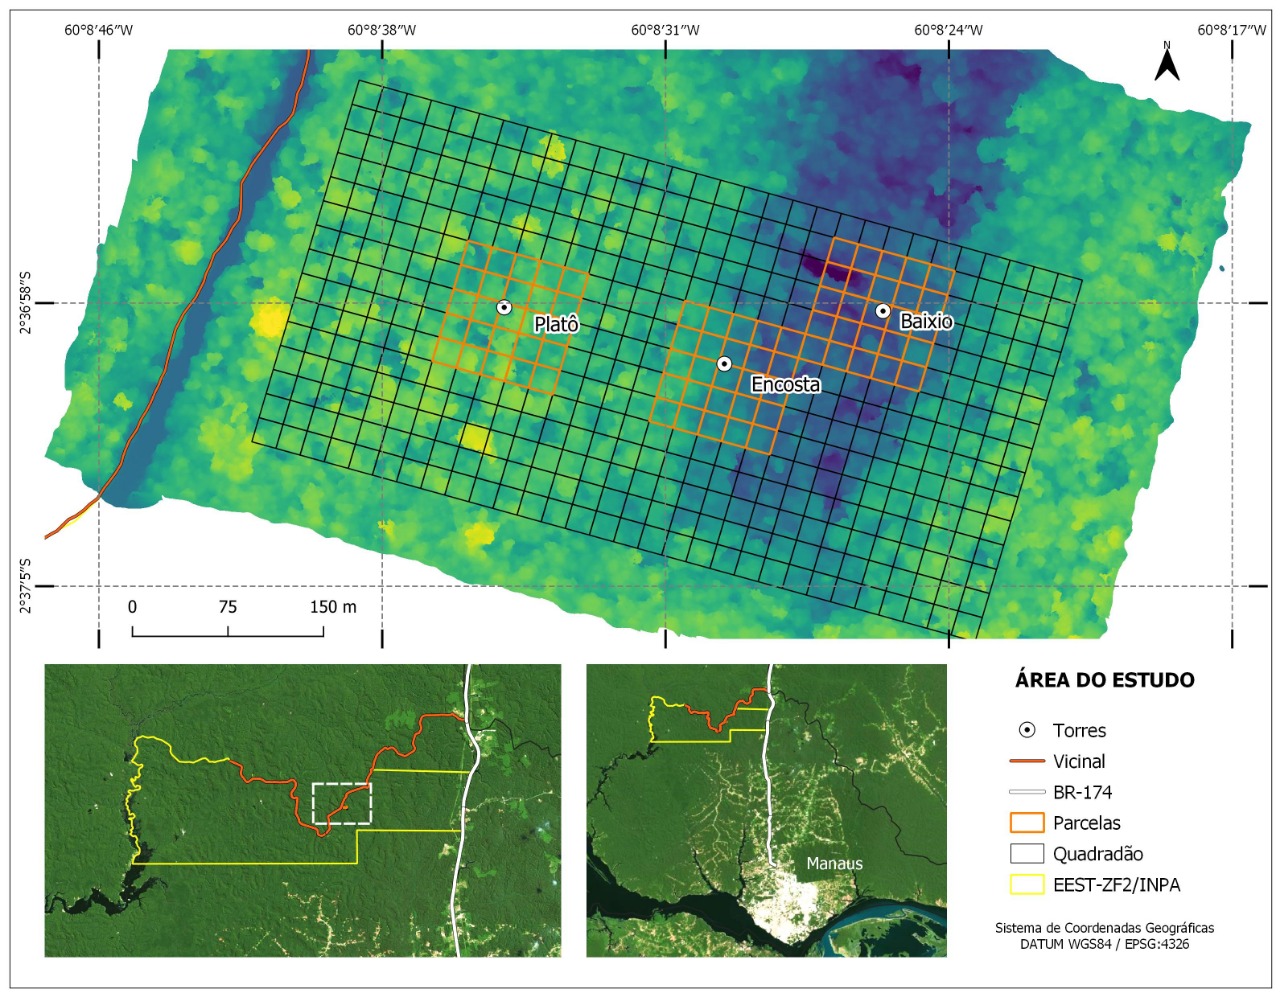 Wind-tree interactions in the Amazon: INVENTA